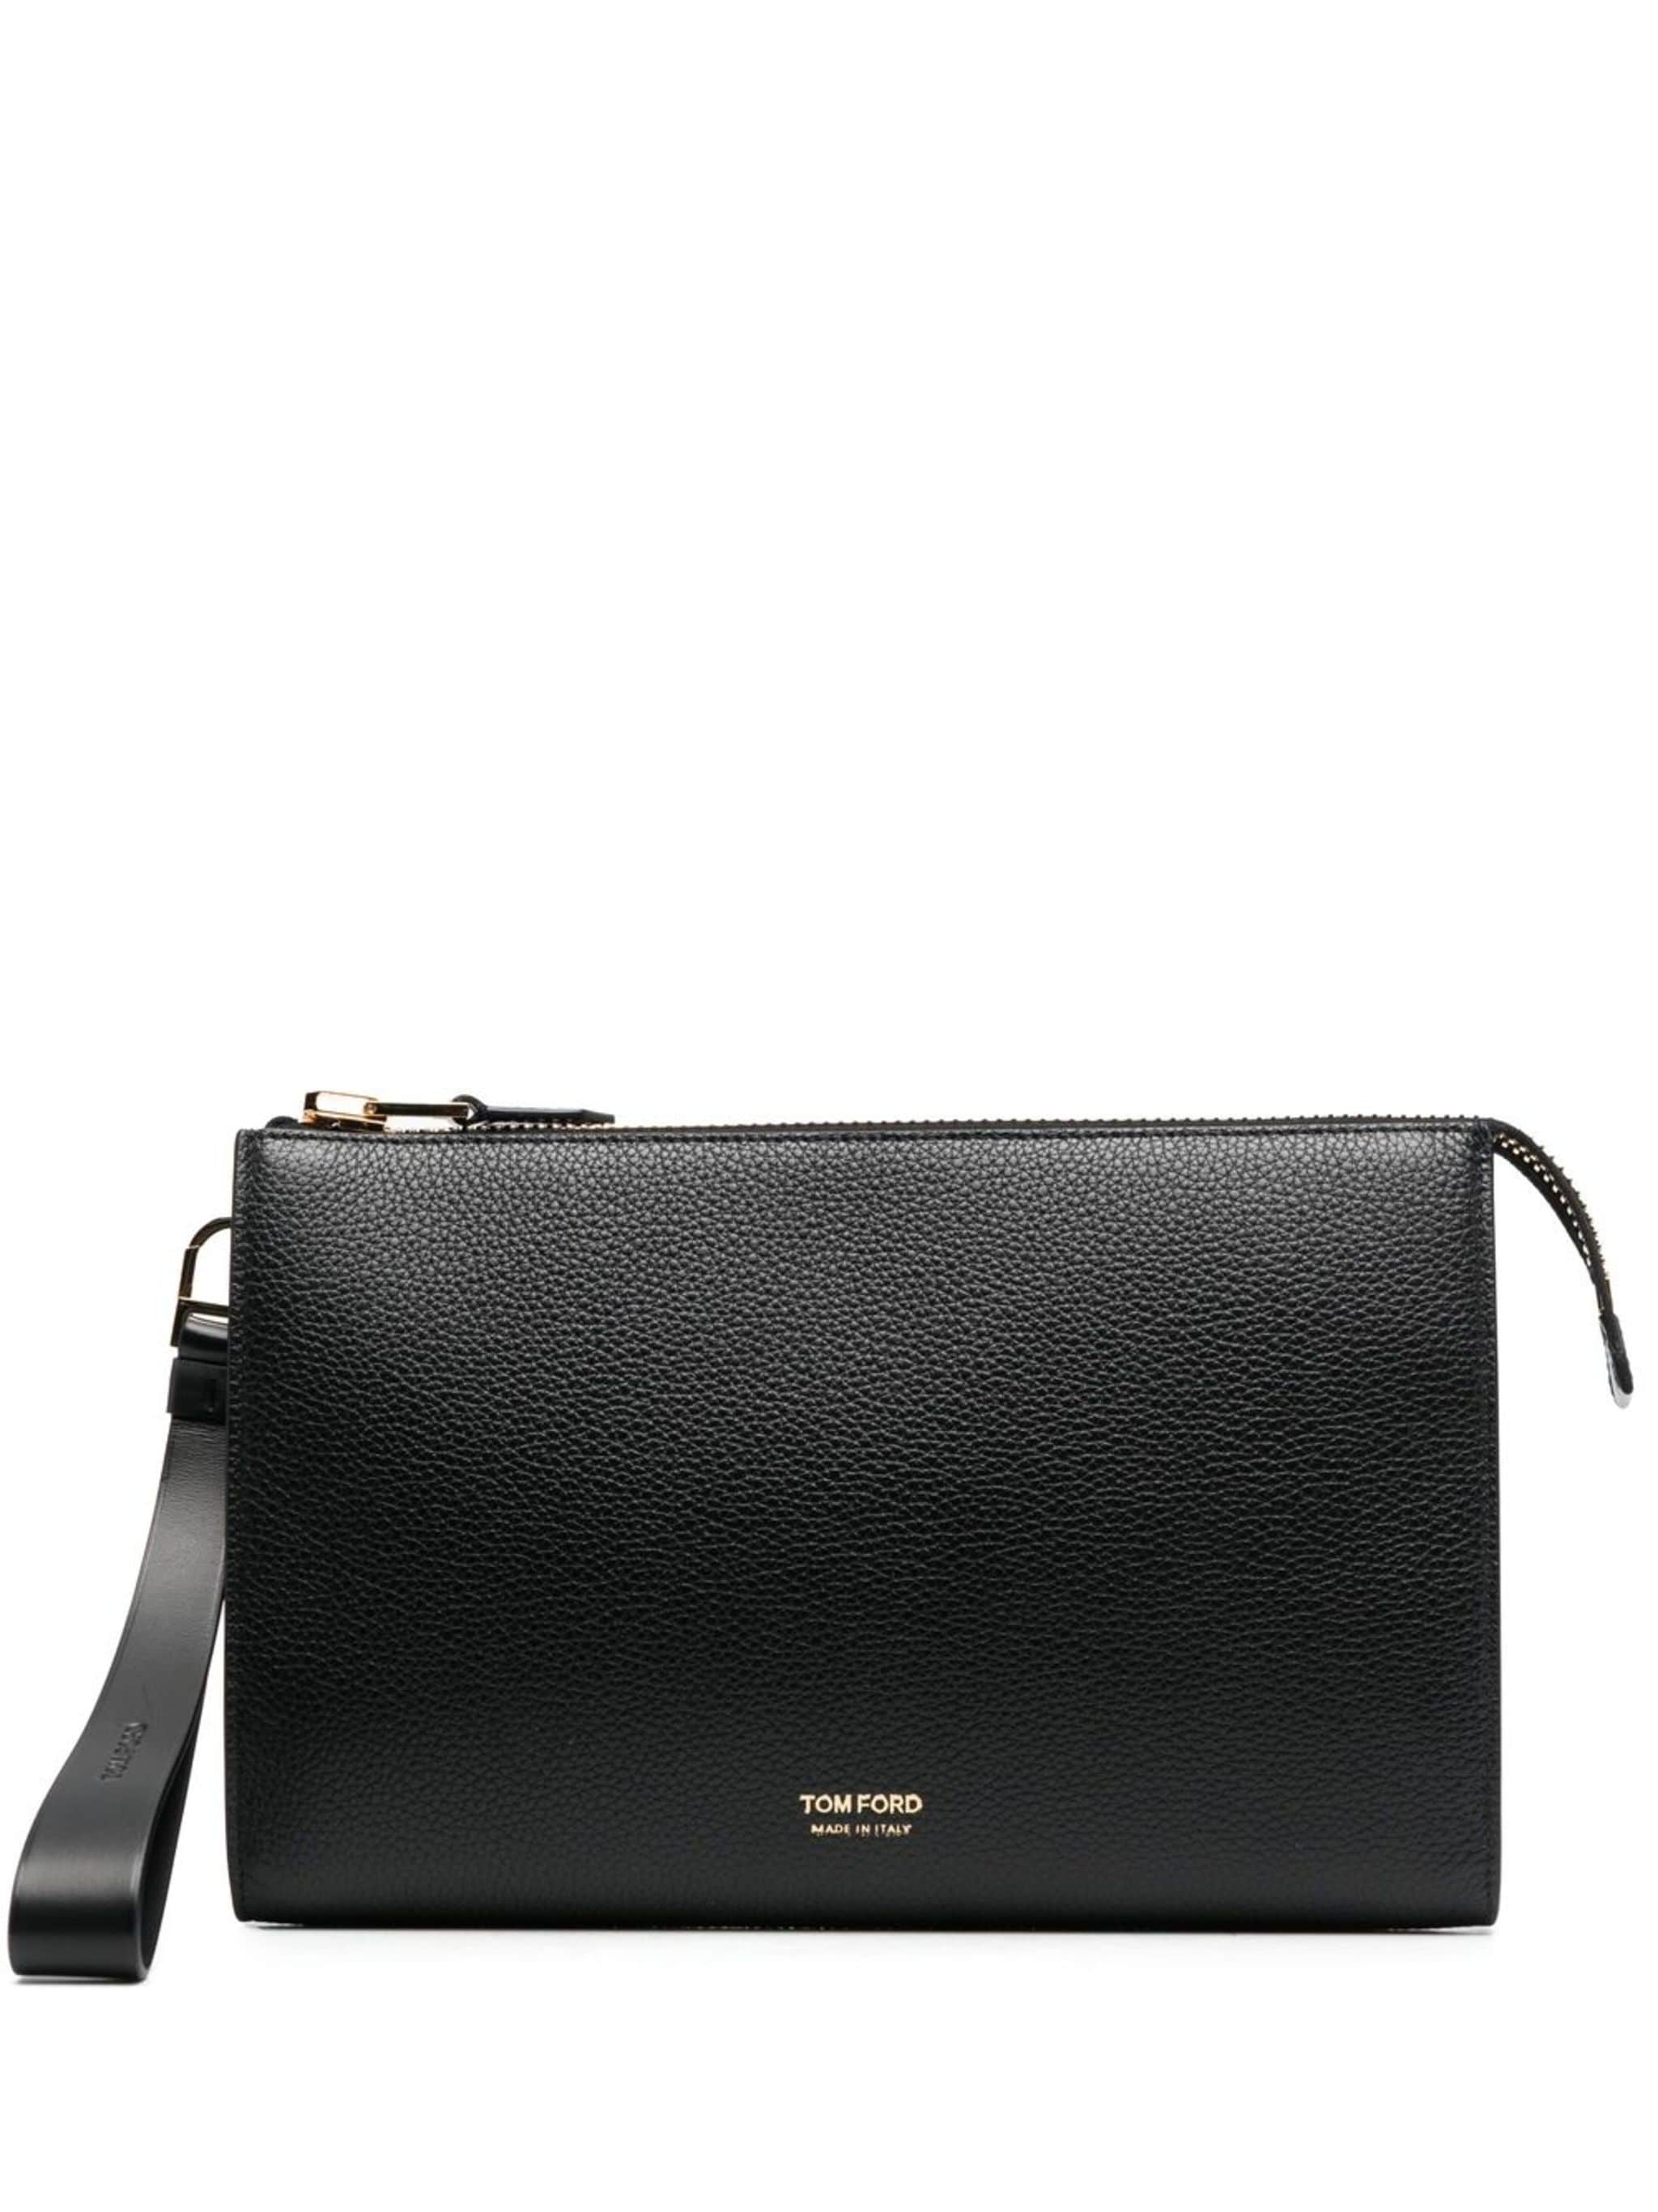 Shop Tom Ford Grained-texture Clutch Bag